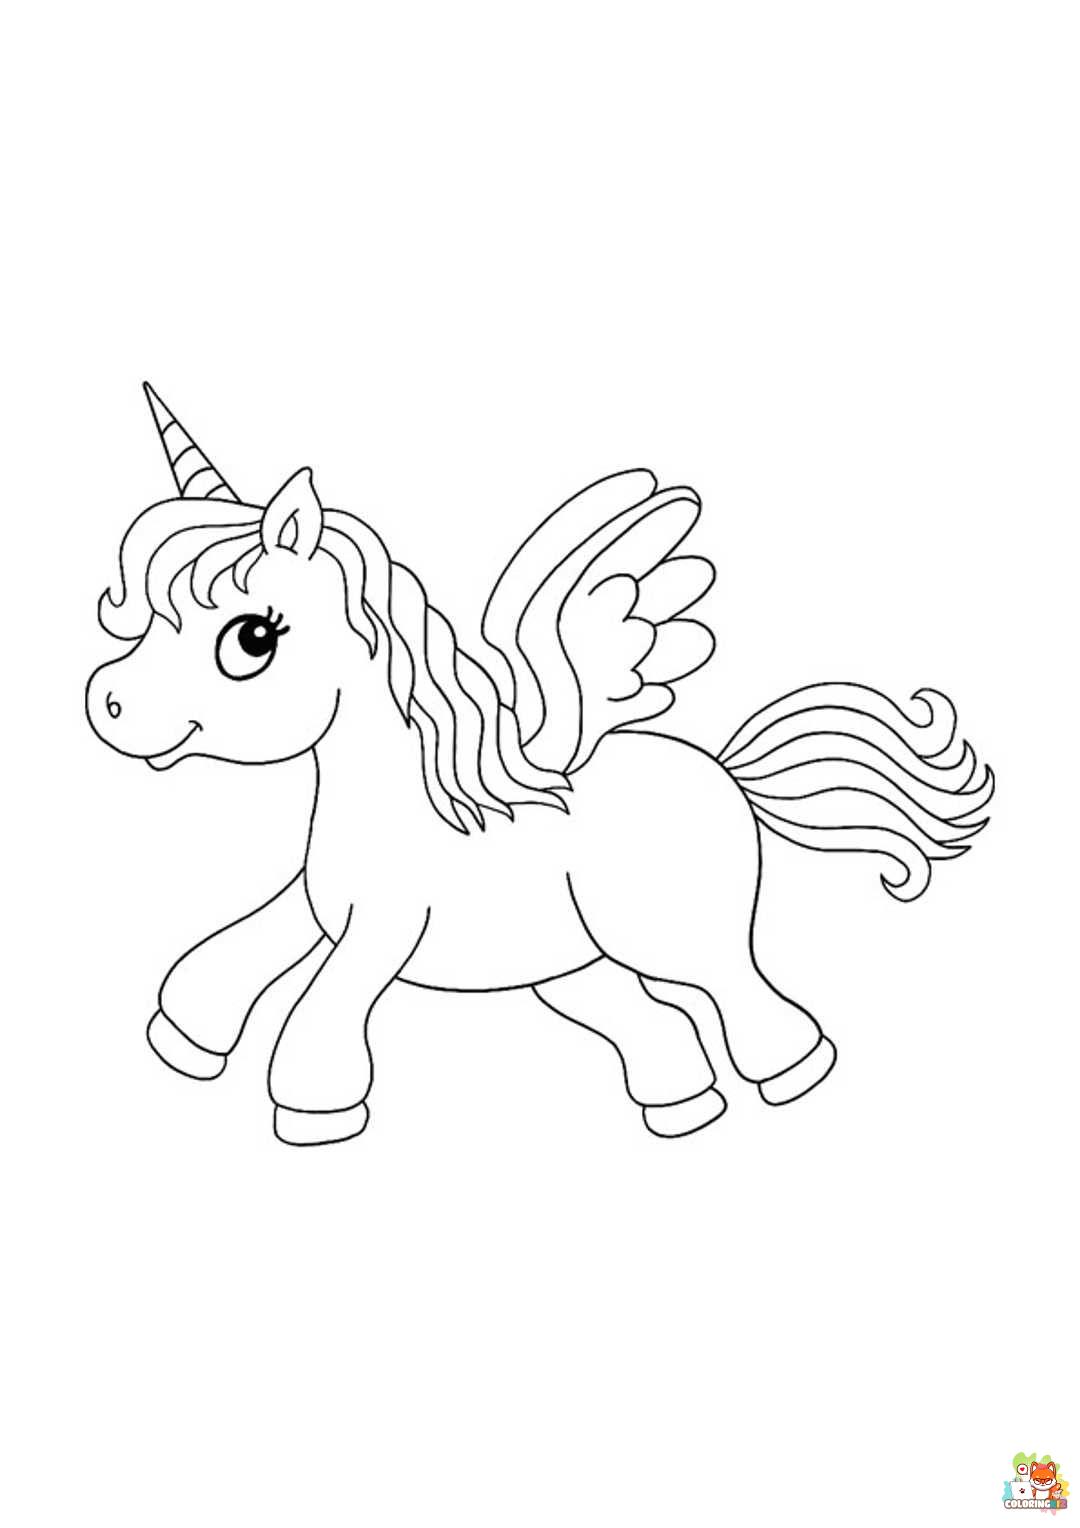 Winged Unicorn Coloring Pages 3